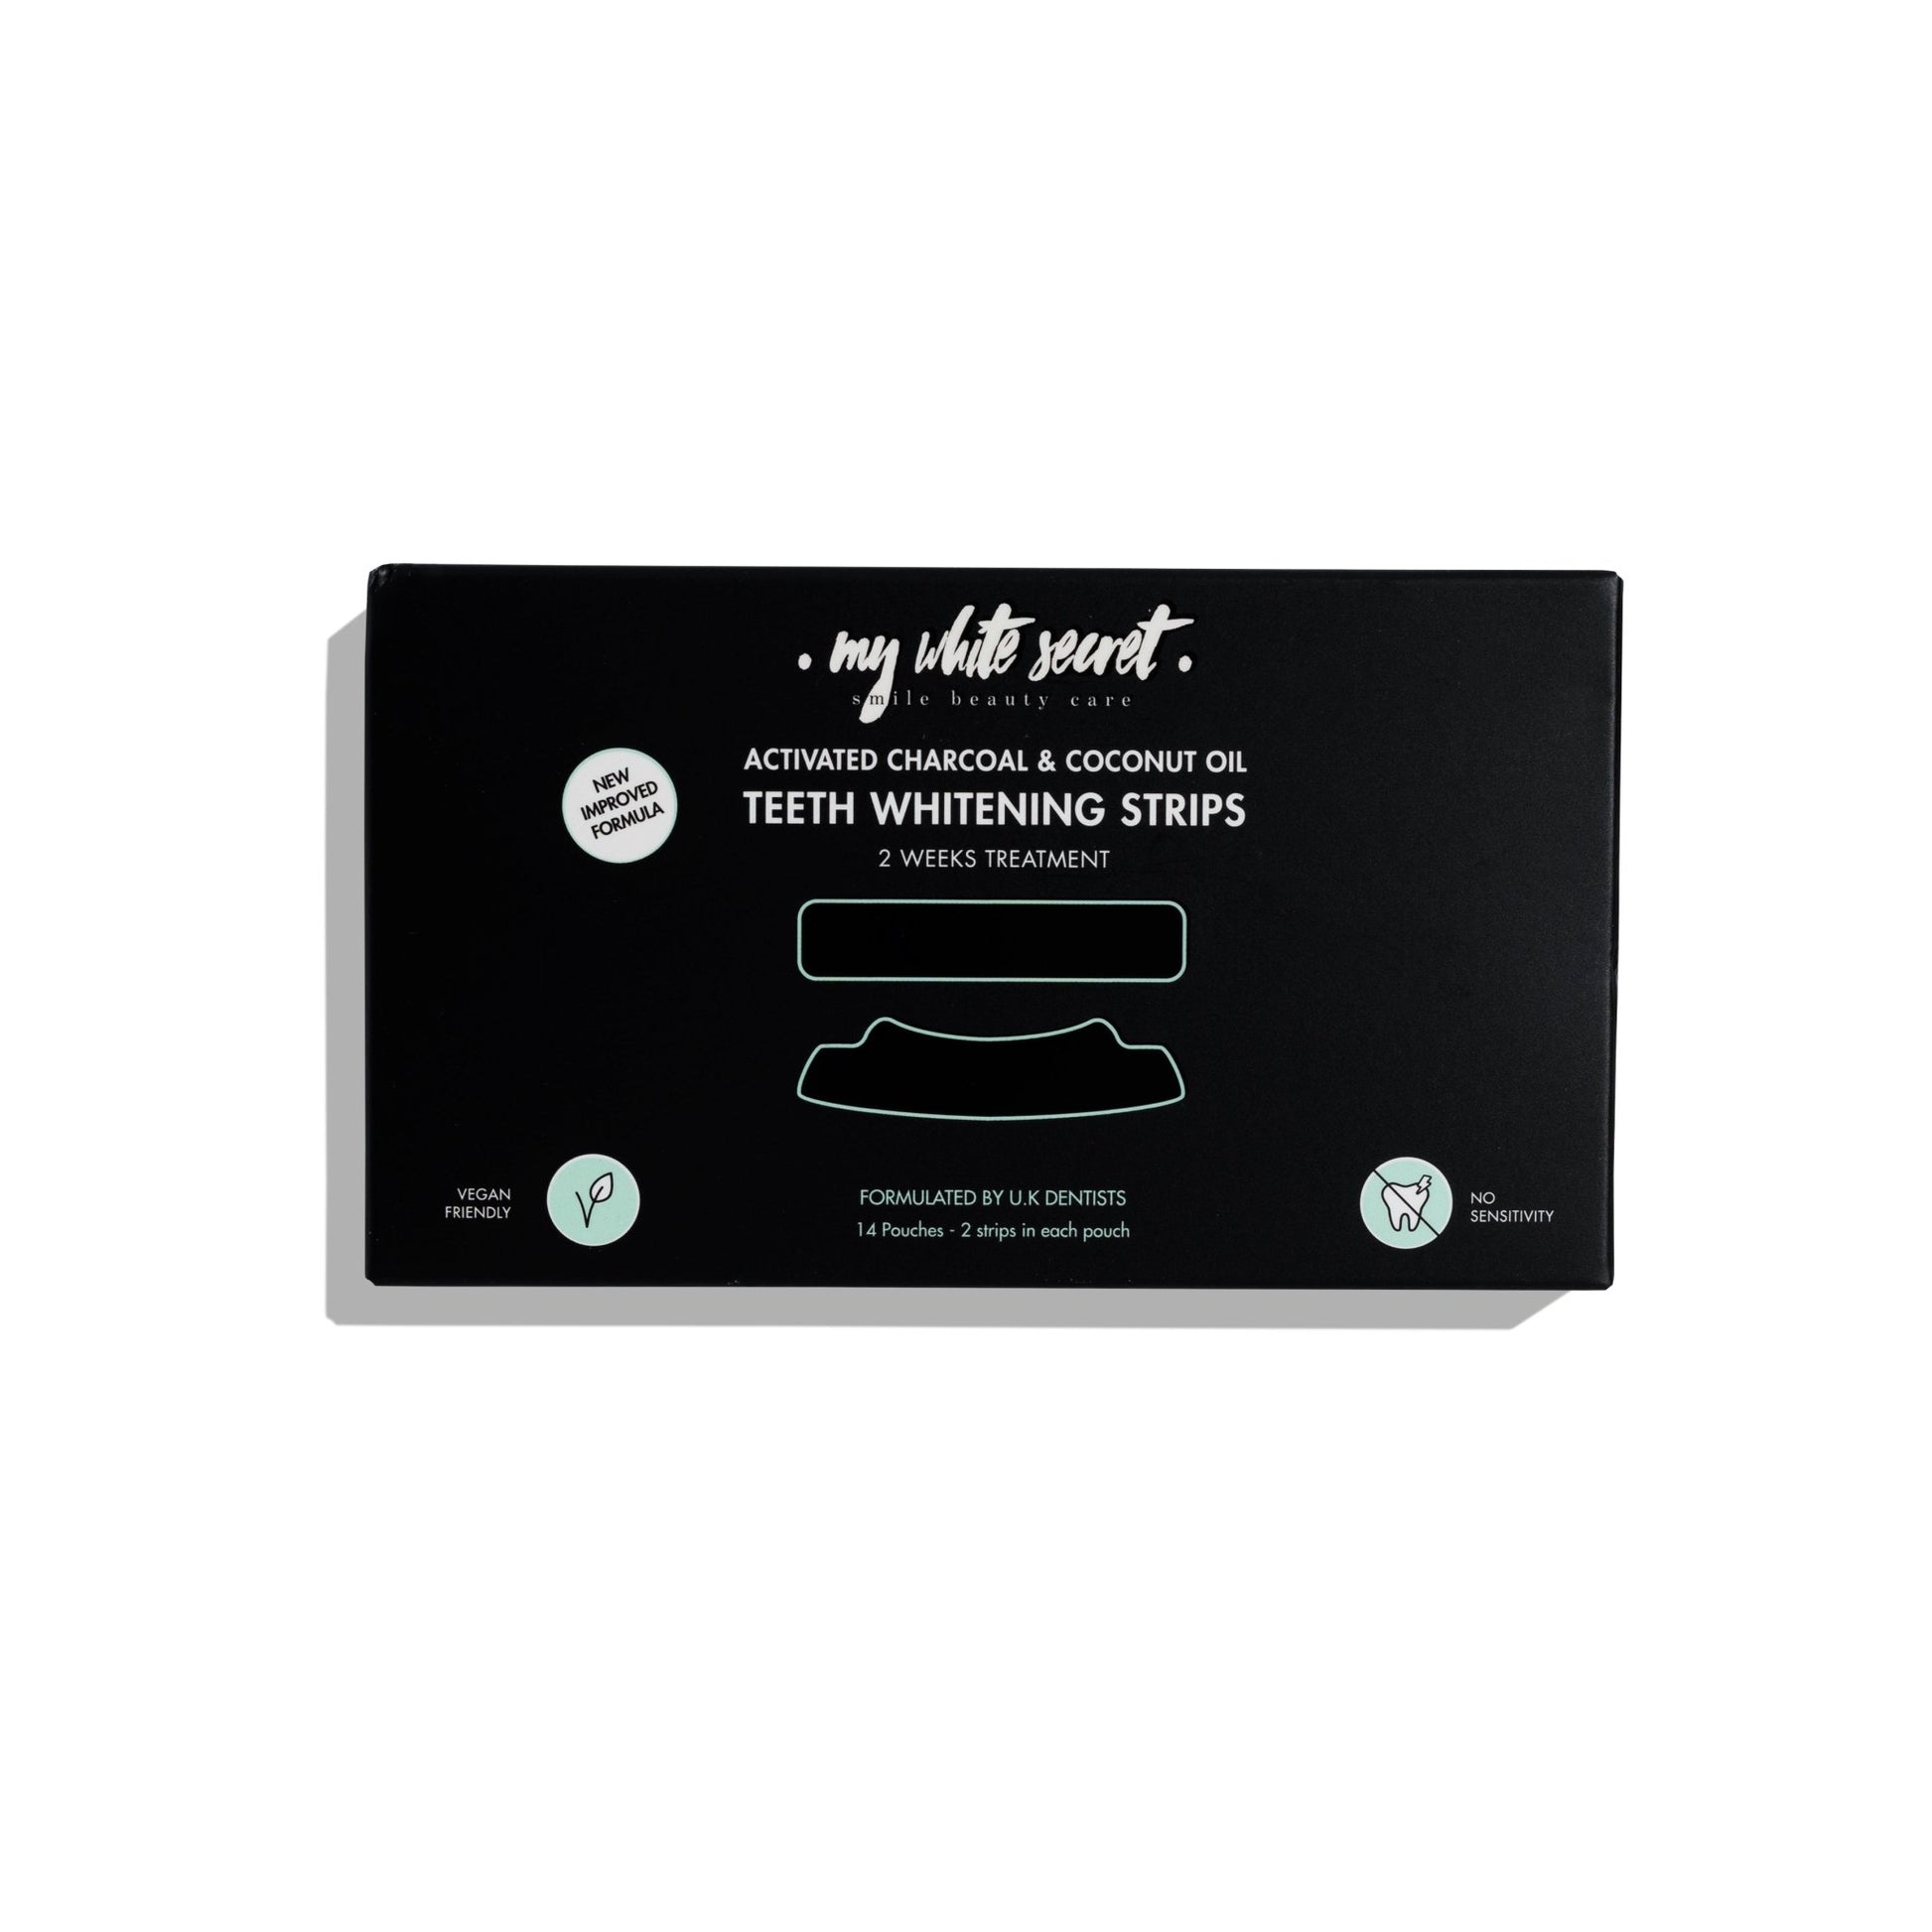 Activated Charcoal & Coconut oil teeth whitening strips - My White Secret